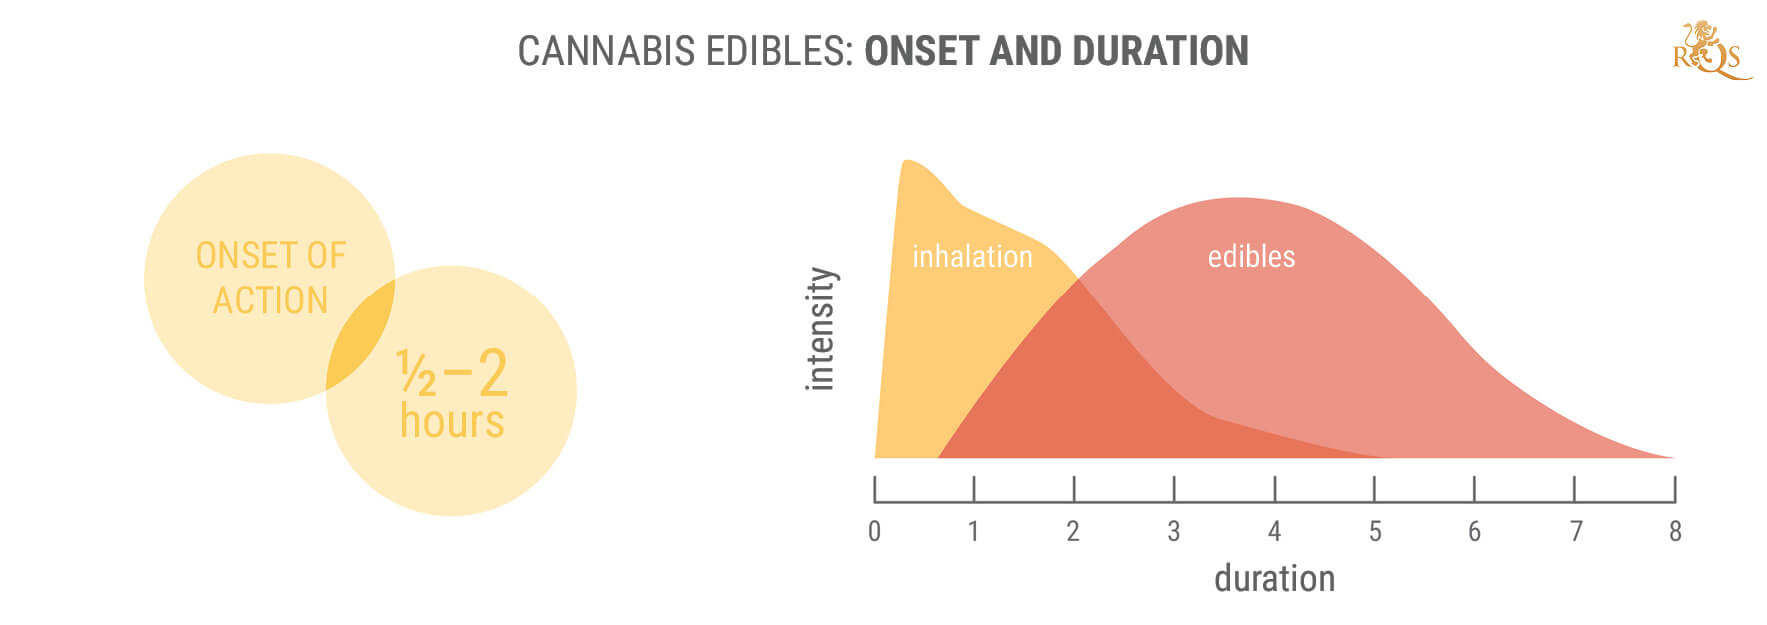 The Benefits of 11-hydroxy-THC and Edibles